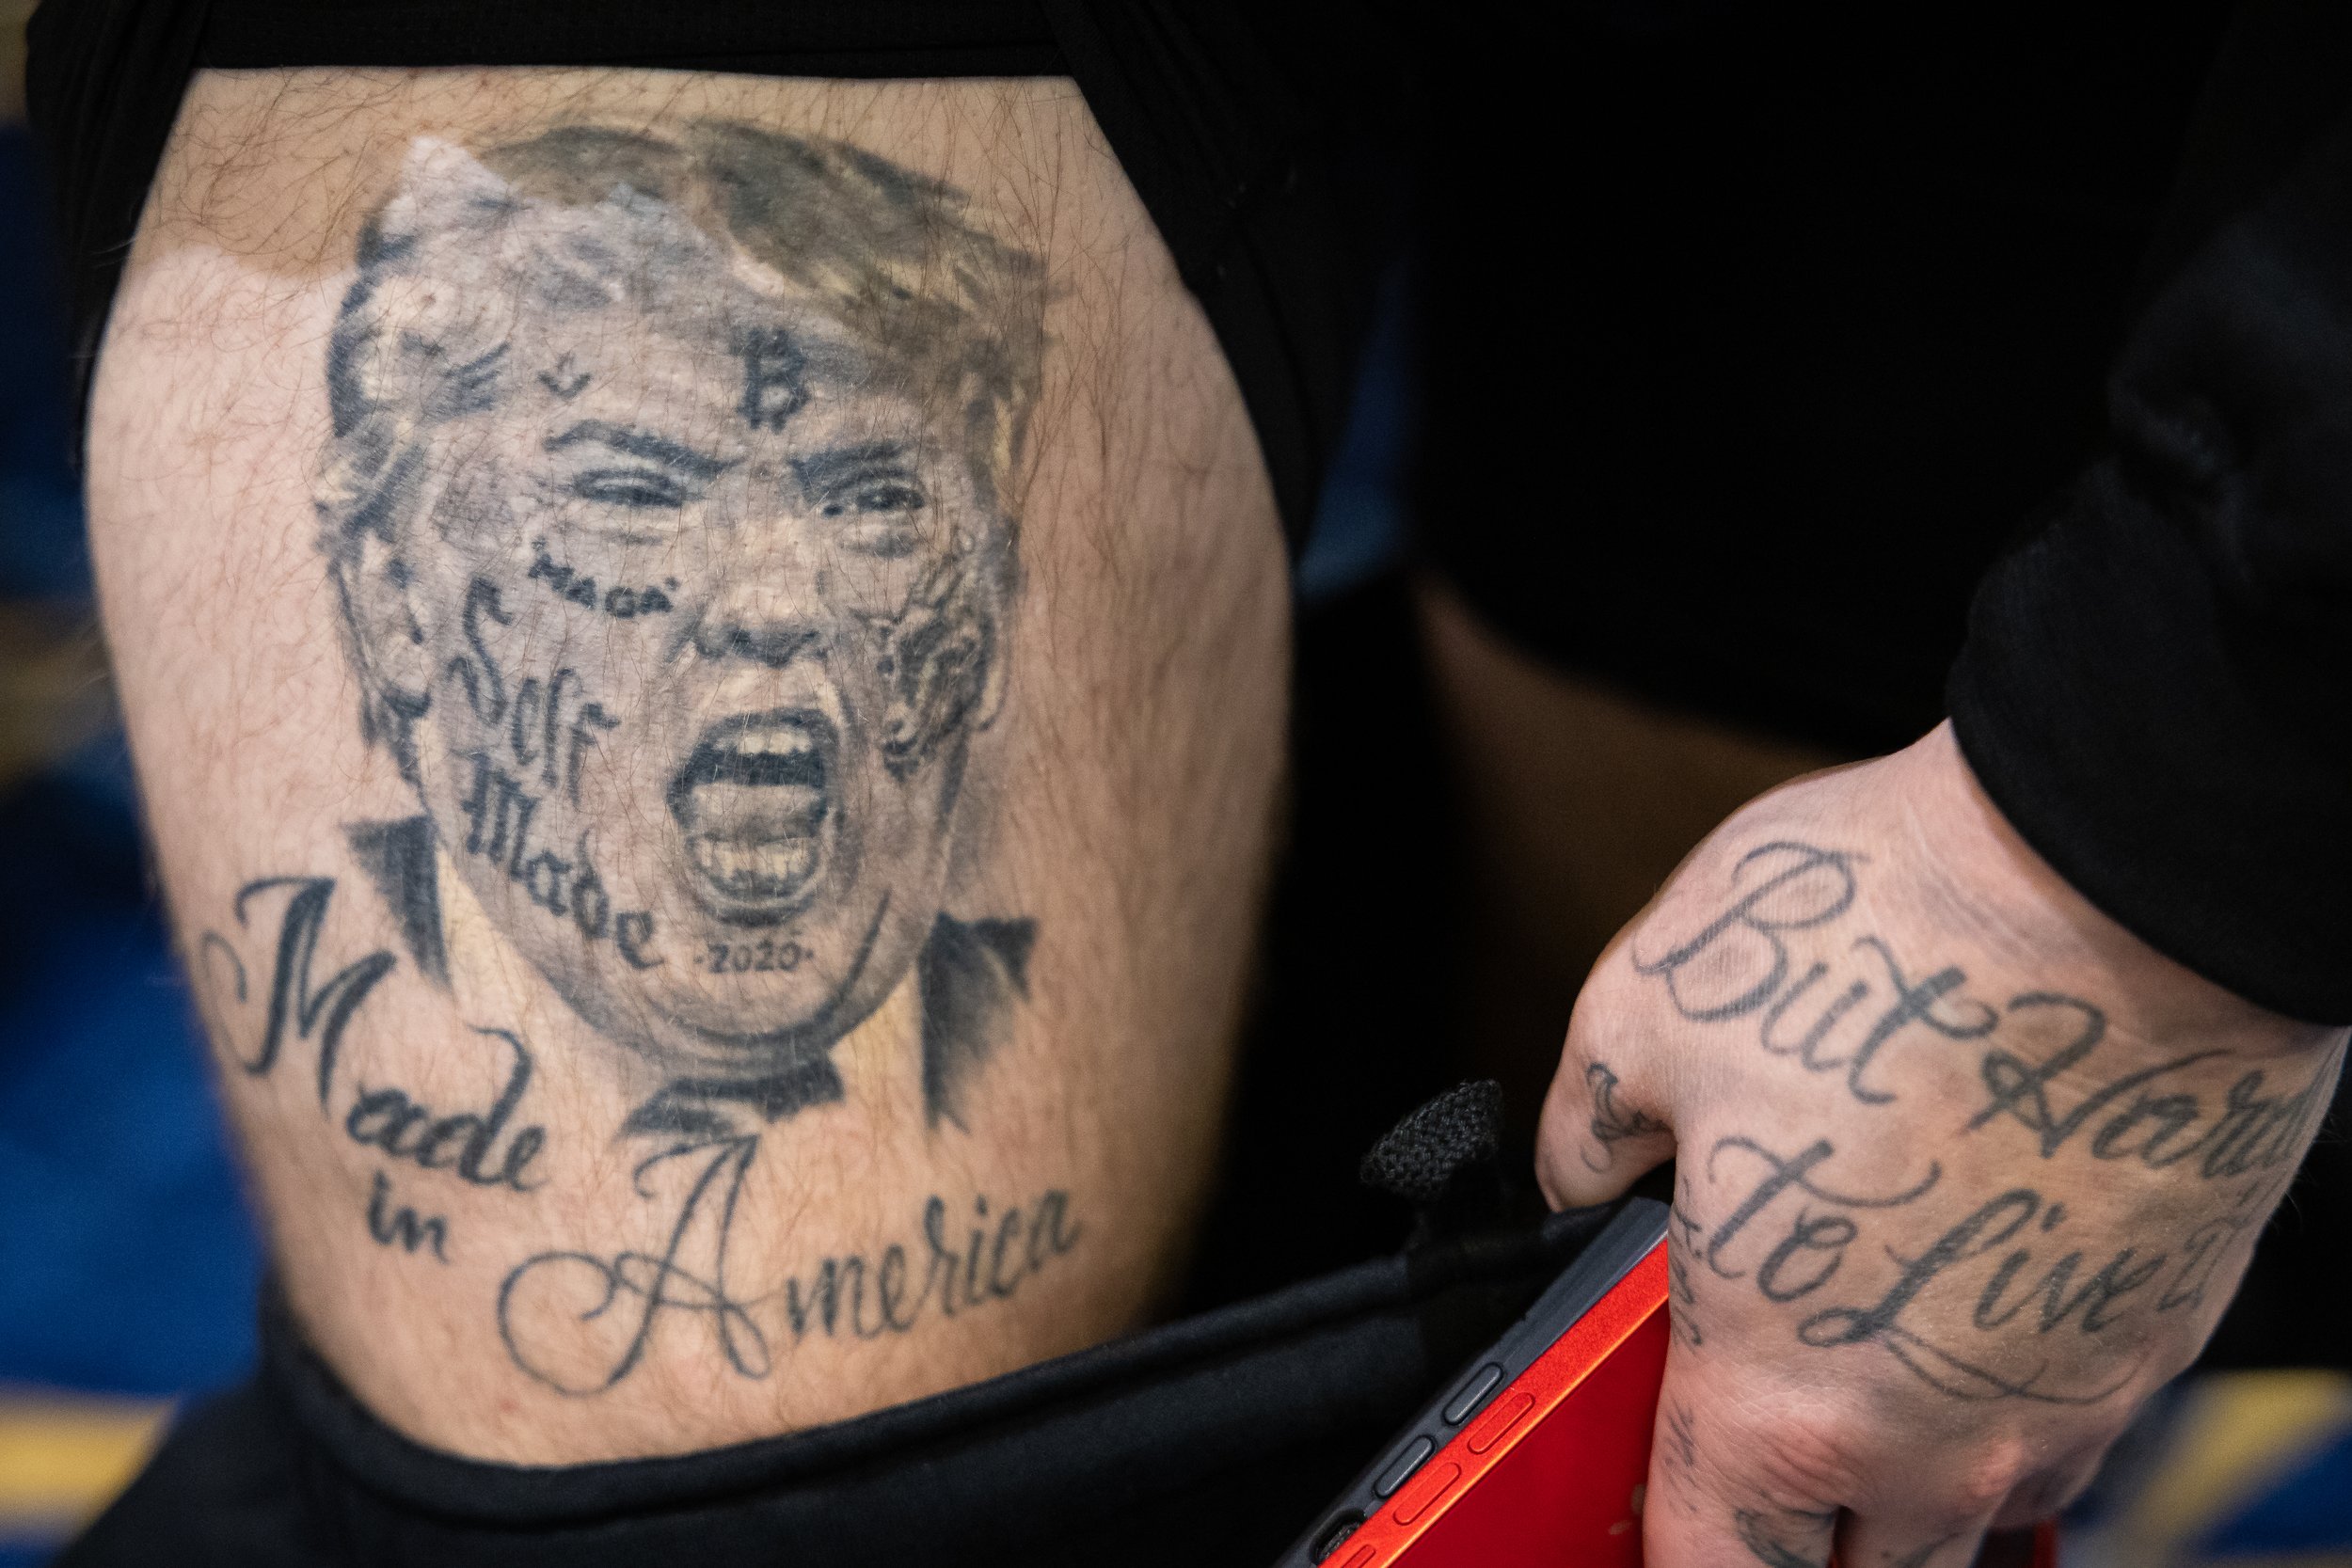  Rapper Forgiato Blow exposes his leg to show off a tattoo depicting former President Donald Trump during the Conservative Political Action Conference (CPAC) at the Gaylord National Resort and Convention Center in National Harbor, Md., March 3, 2023.